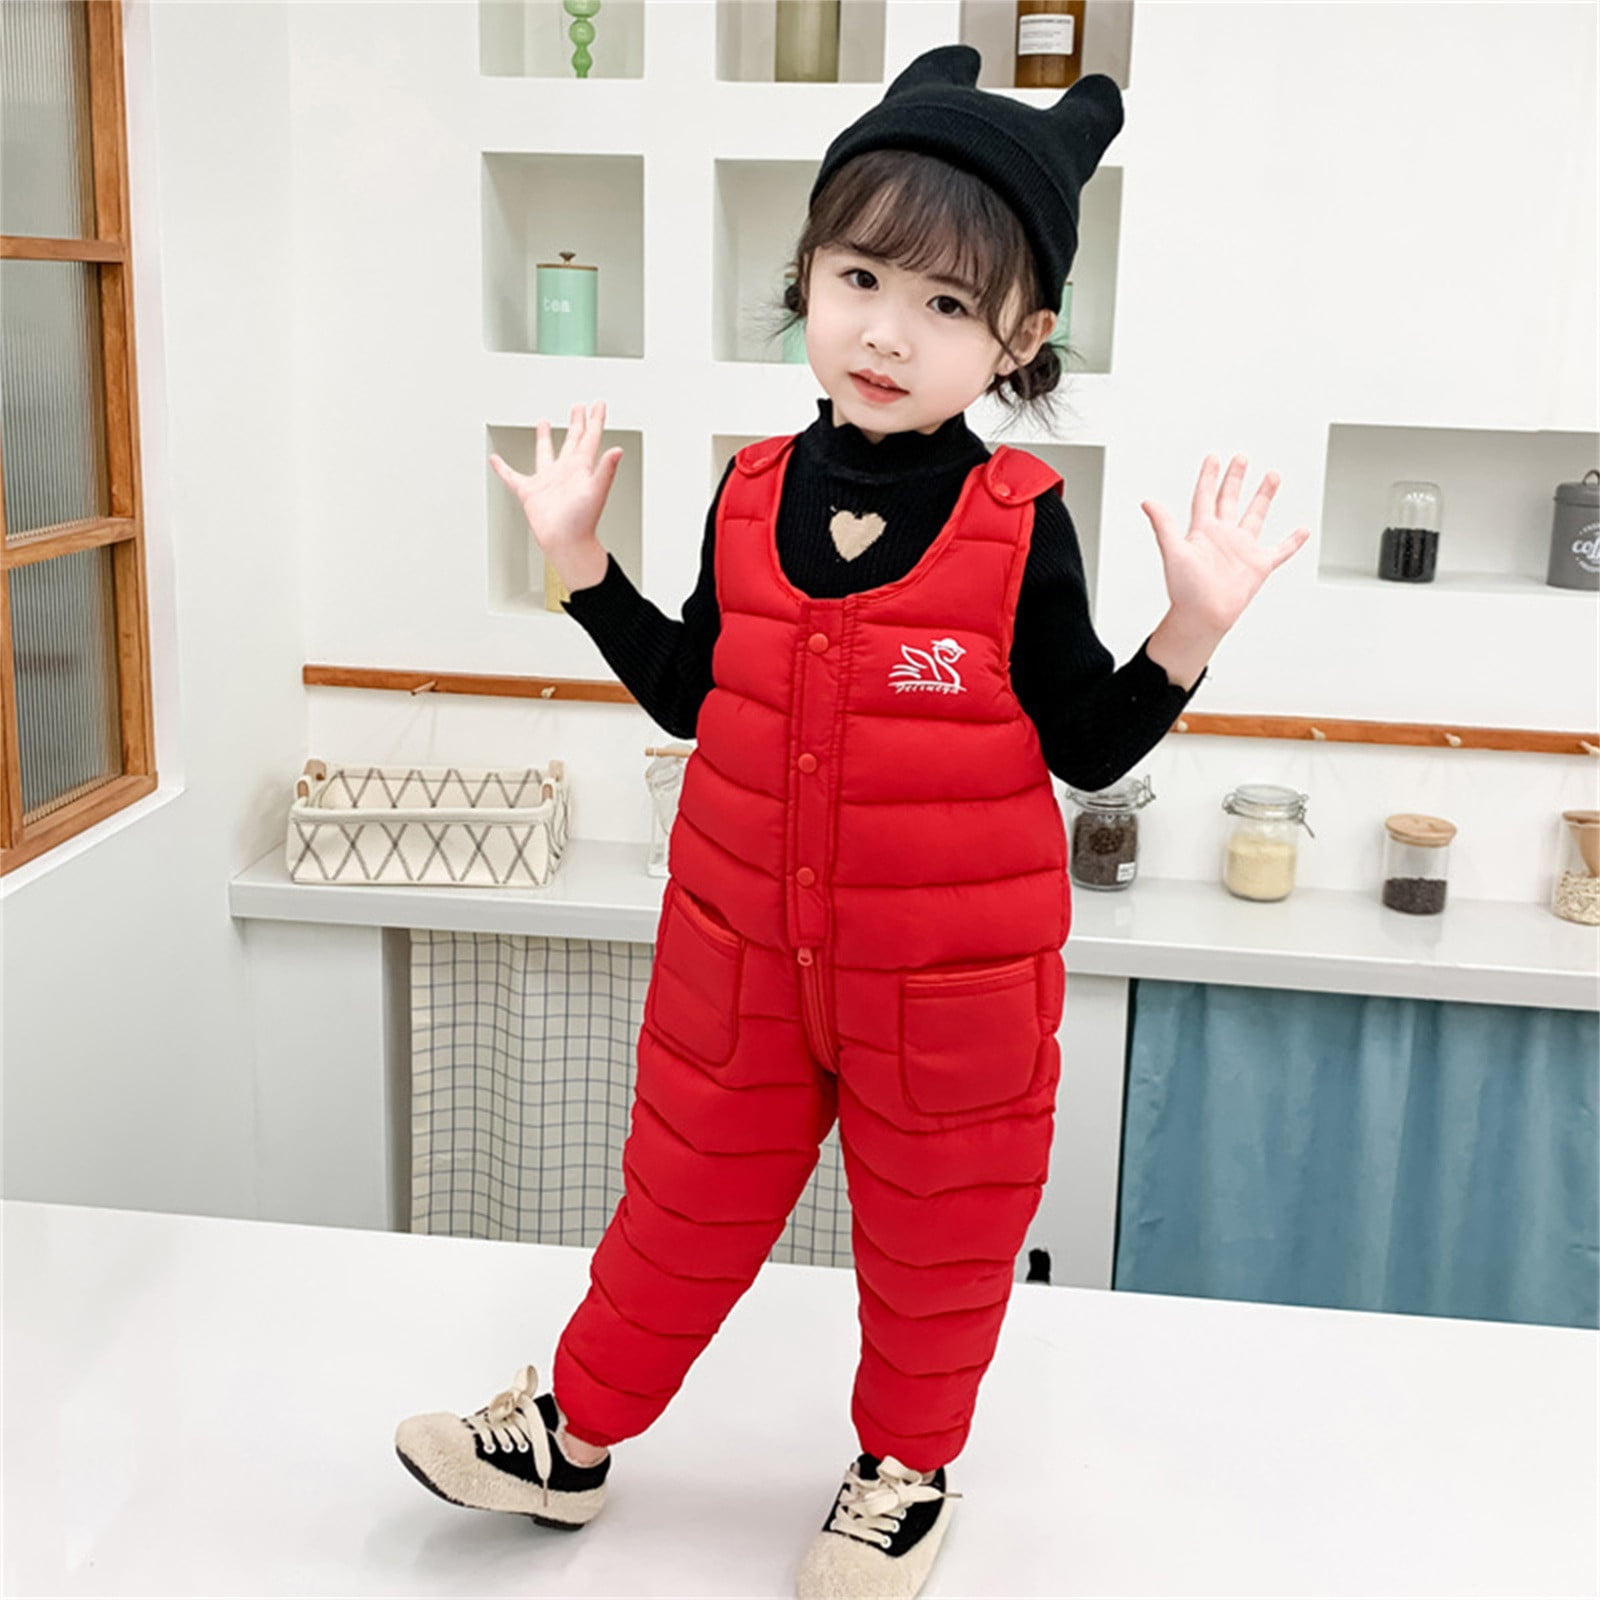 Dungarees, Jumpsuits - Clothing - Boy (2-18 years)